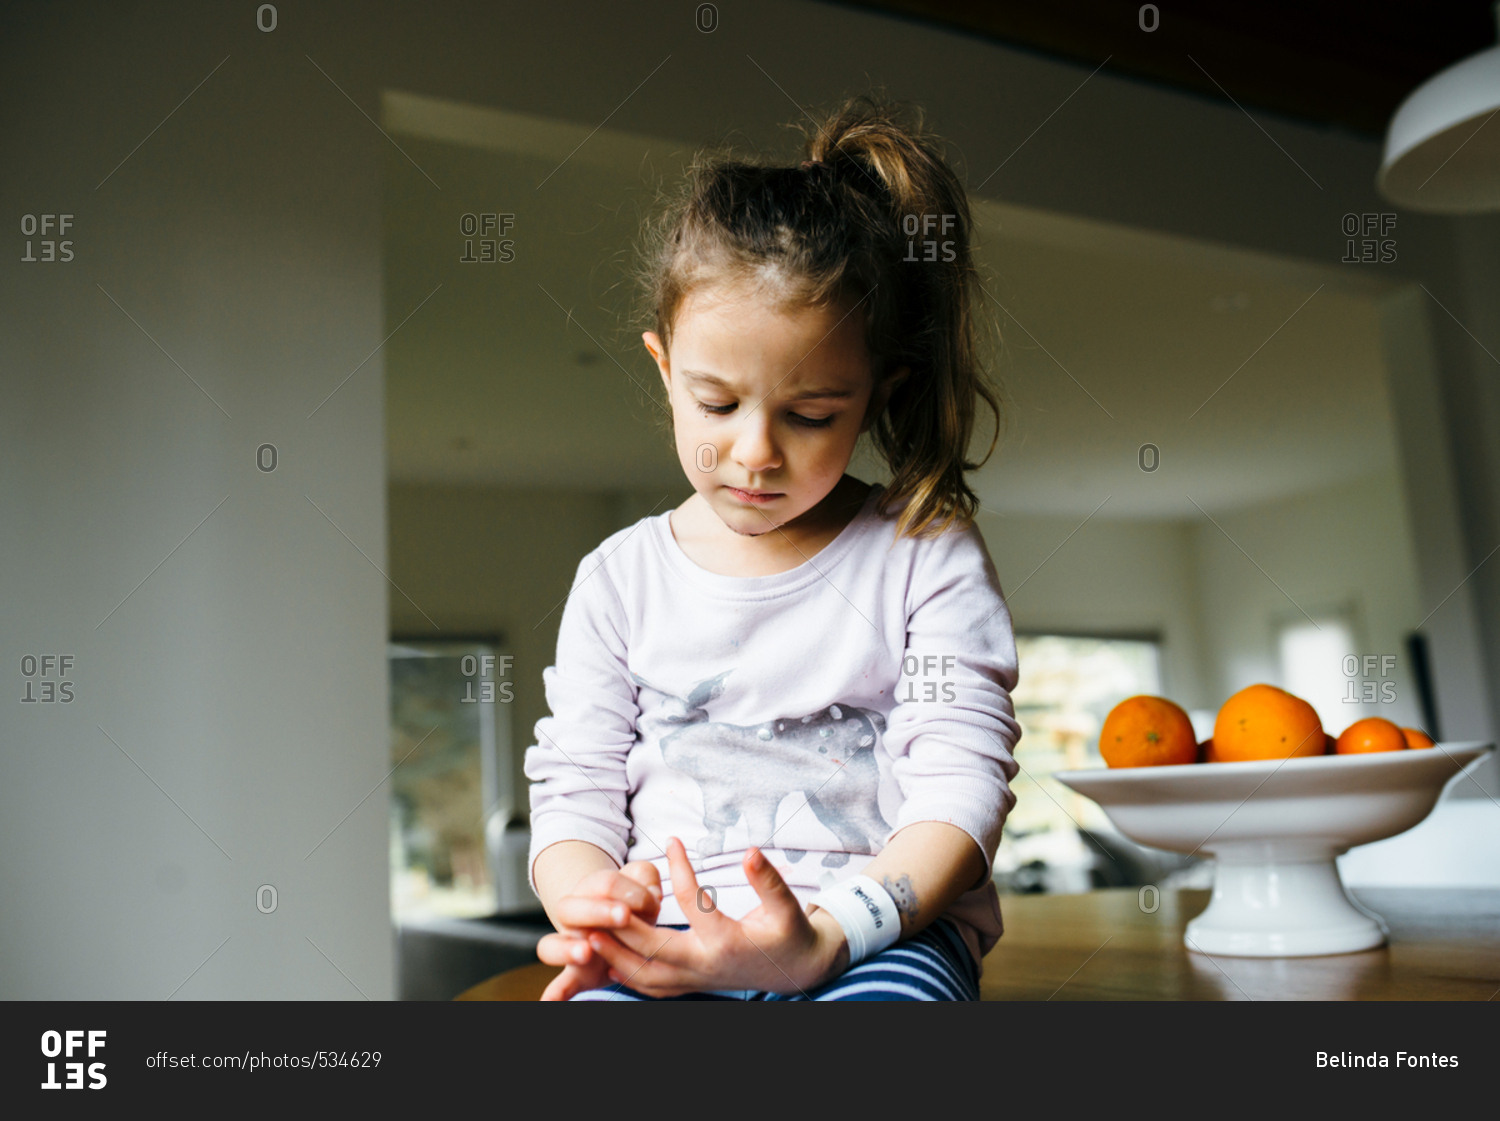 Young girl with fresh stitches sitting on table by oranges